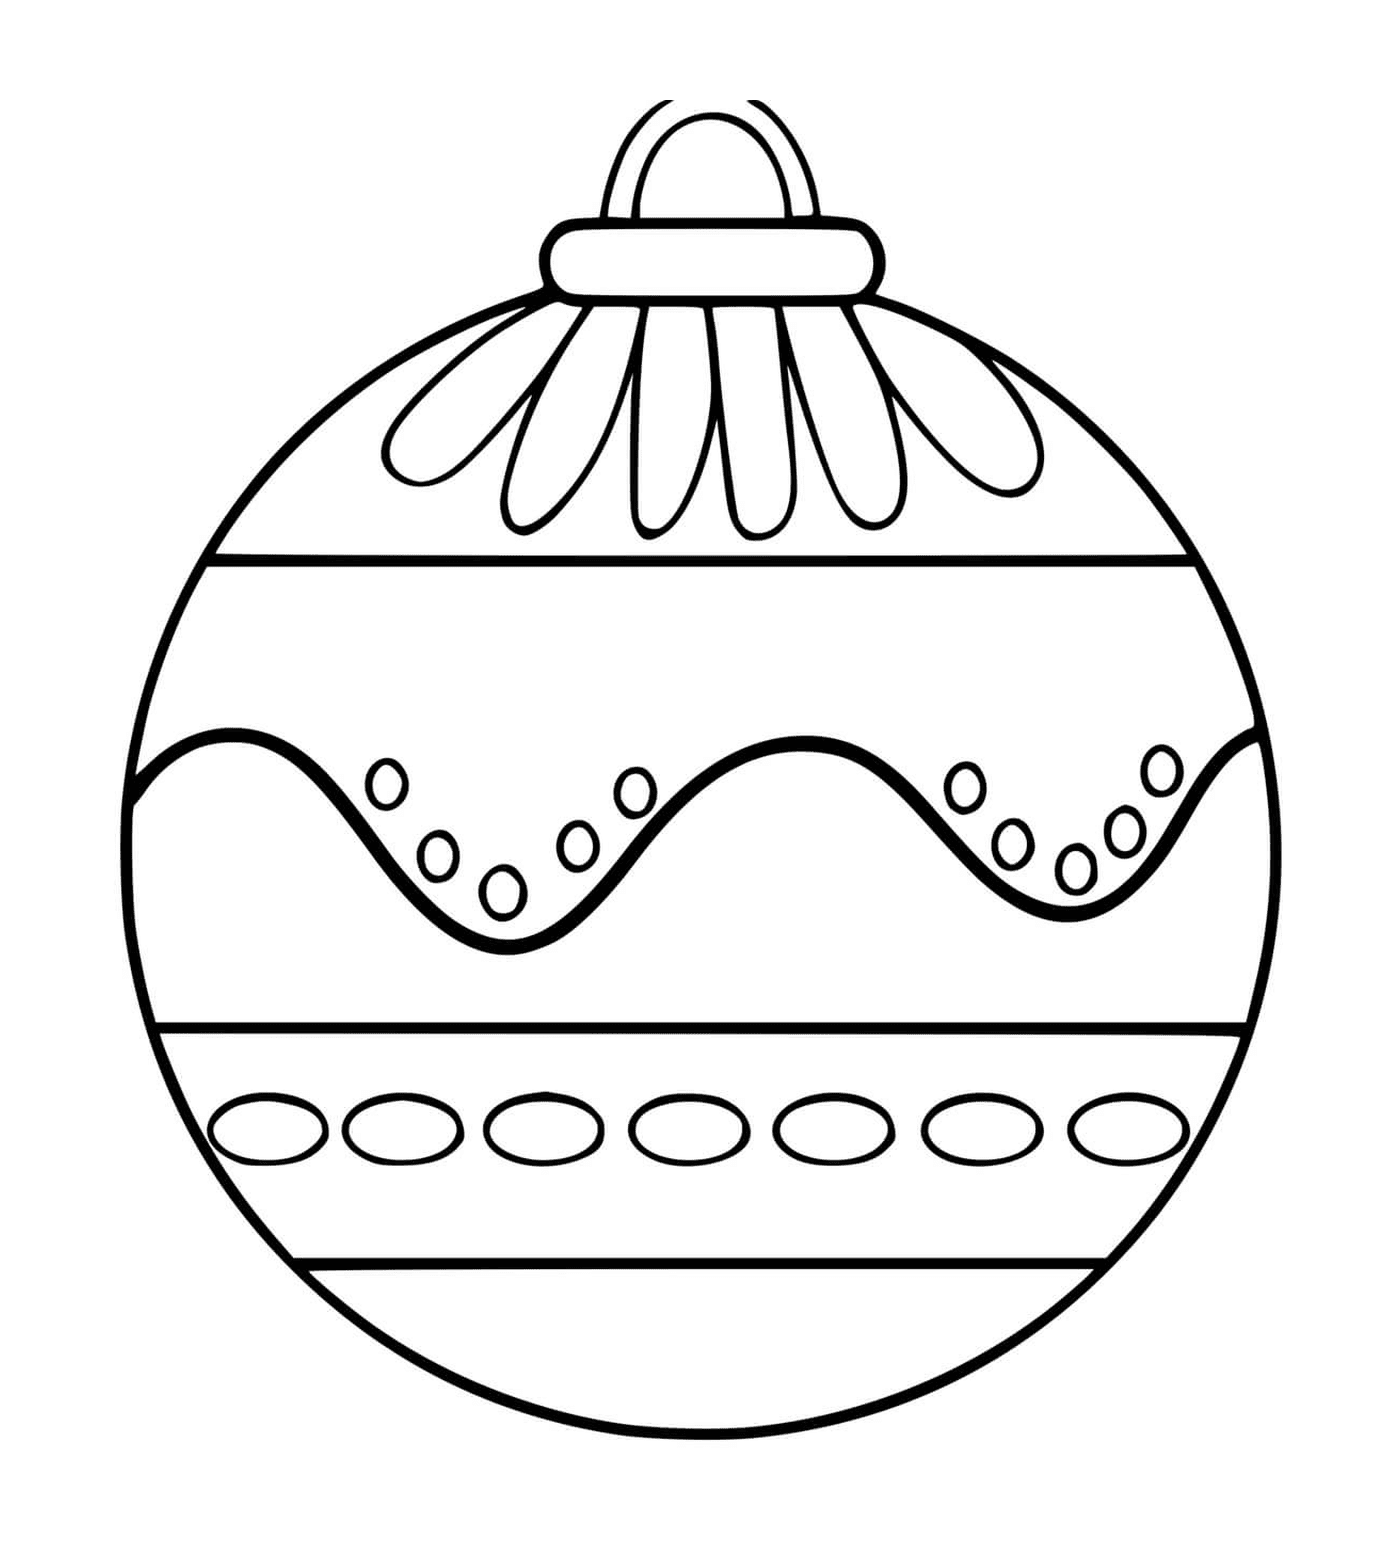  A Christmas ball with various patterns 